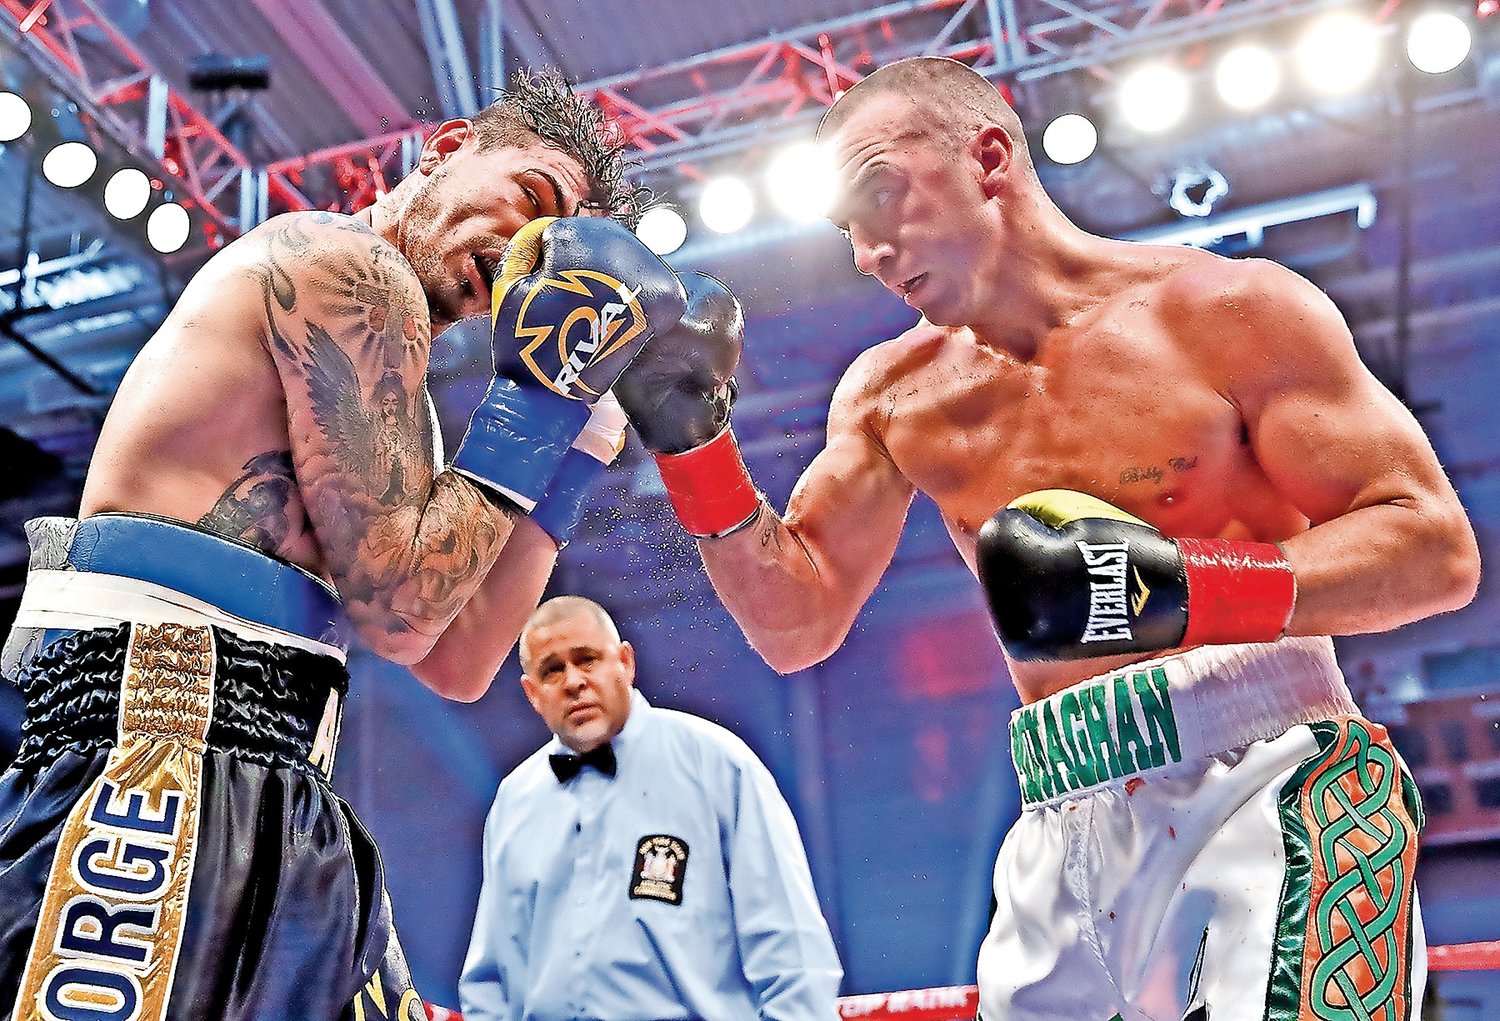 Seanie Monaghan, right, defeated Chicago’s Donovan “Da Bomb” George in 2015, and clinched the North American Boxing Organization light heavyweight title.